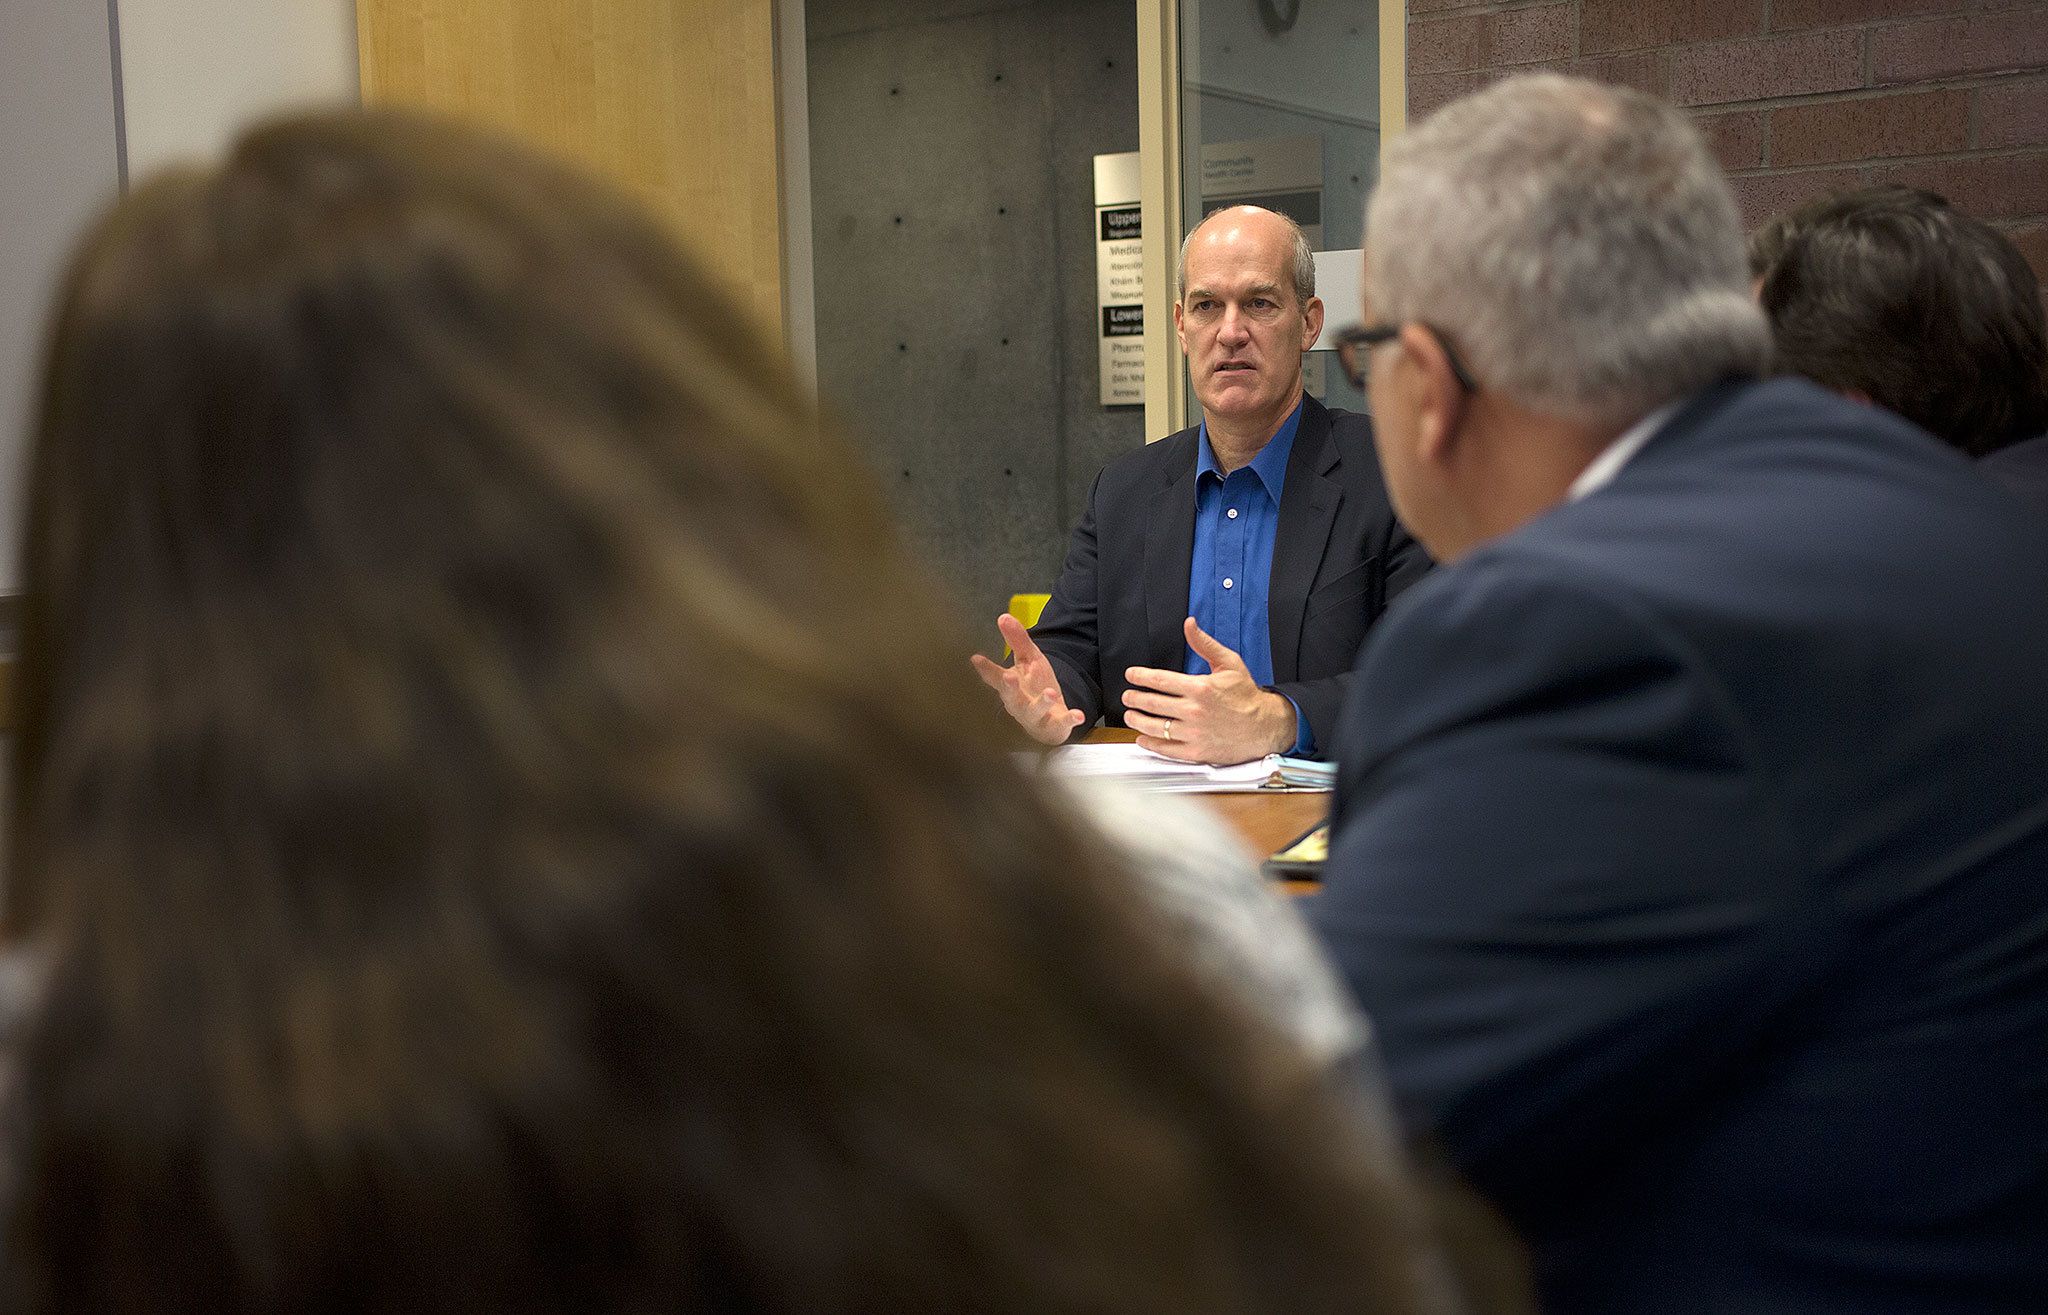 Congressman Rick Larsen, D-Wash., talks to and answers questions from healthcare officials about the future of the Affordable Care Act at the Community Health Center of Snohomish County Everett-South Clinic on Wednesday. (Andy Bronson / The Herald)